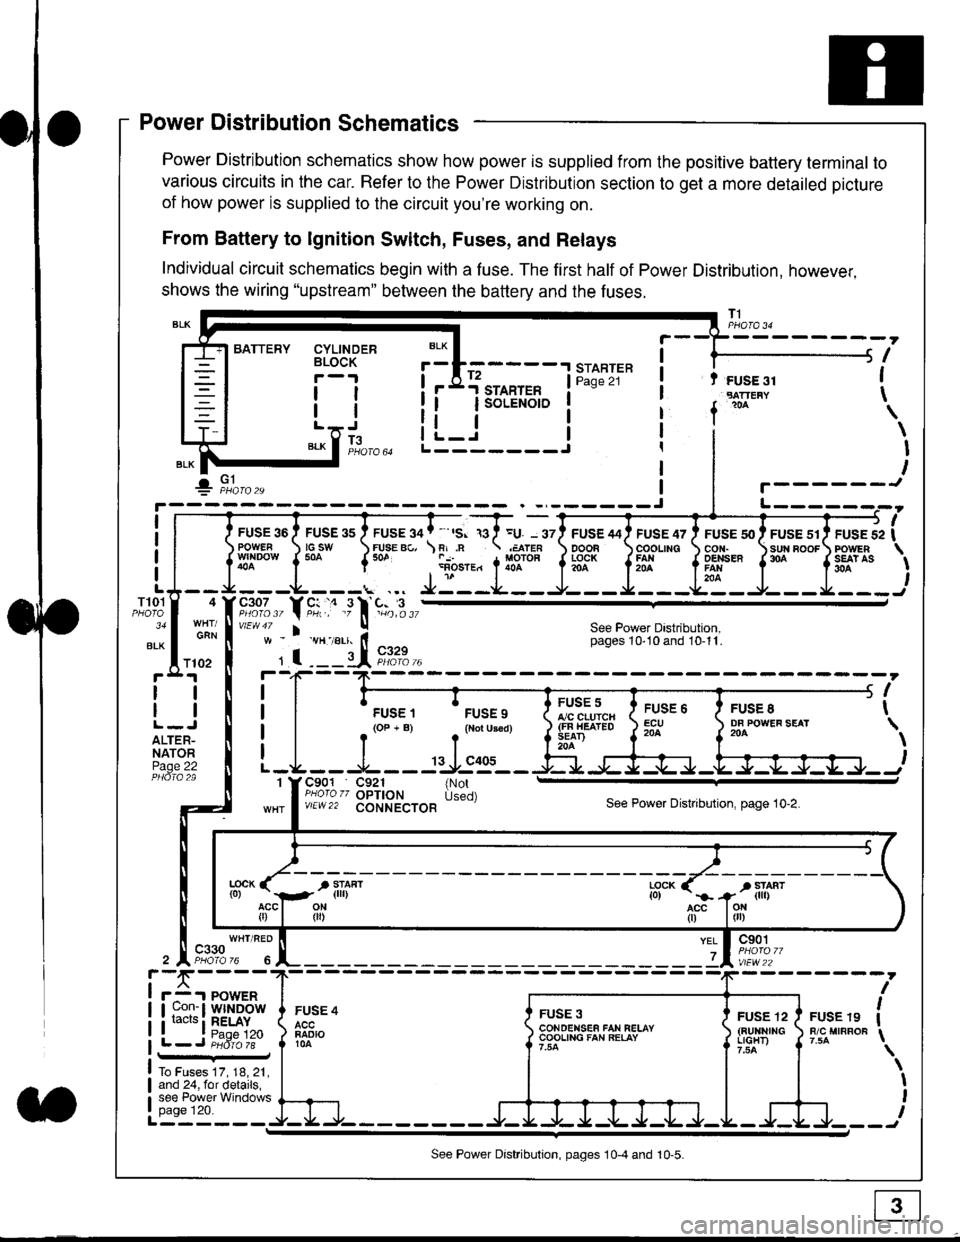 HONDA CIVIC 1997 6.G Workshop Manual Power Distribution Schematics
Power Distribution schematics show how power is supplied from the positive battery terminal to
various circuits in the car. Refer to the Power Distribution section to get